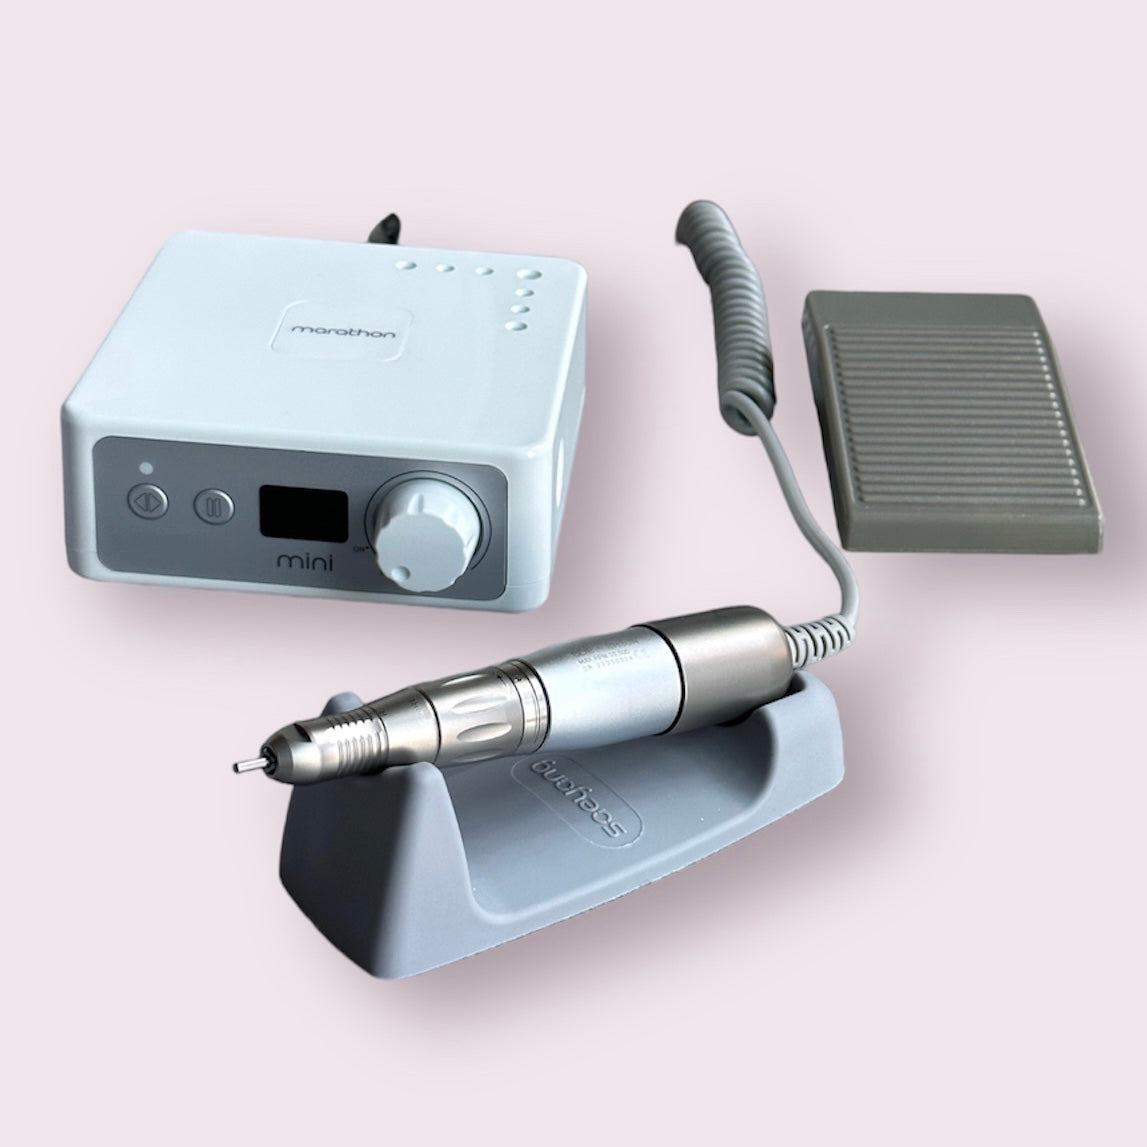 Nail Dust Vacuum Collector MIRACLE (Made in Korea)